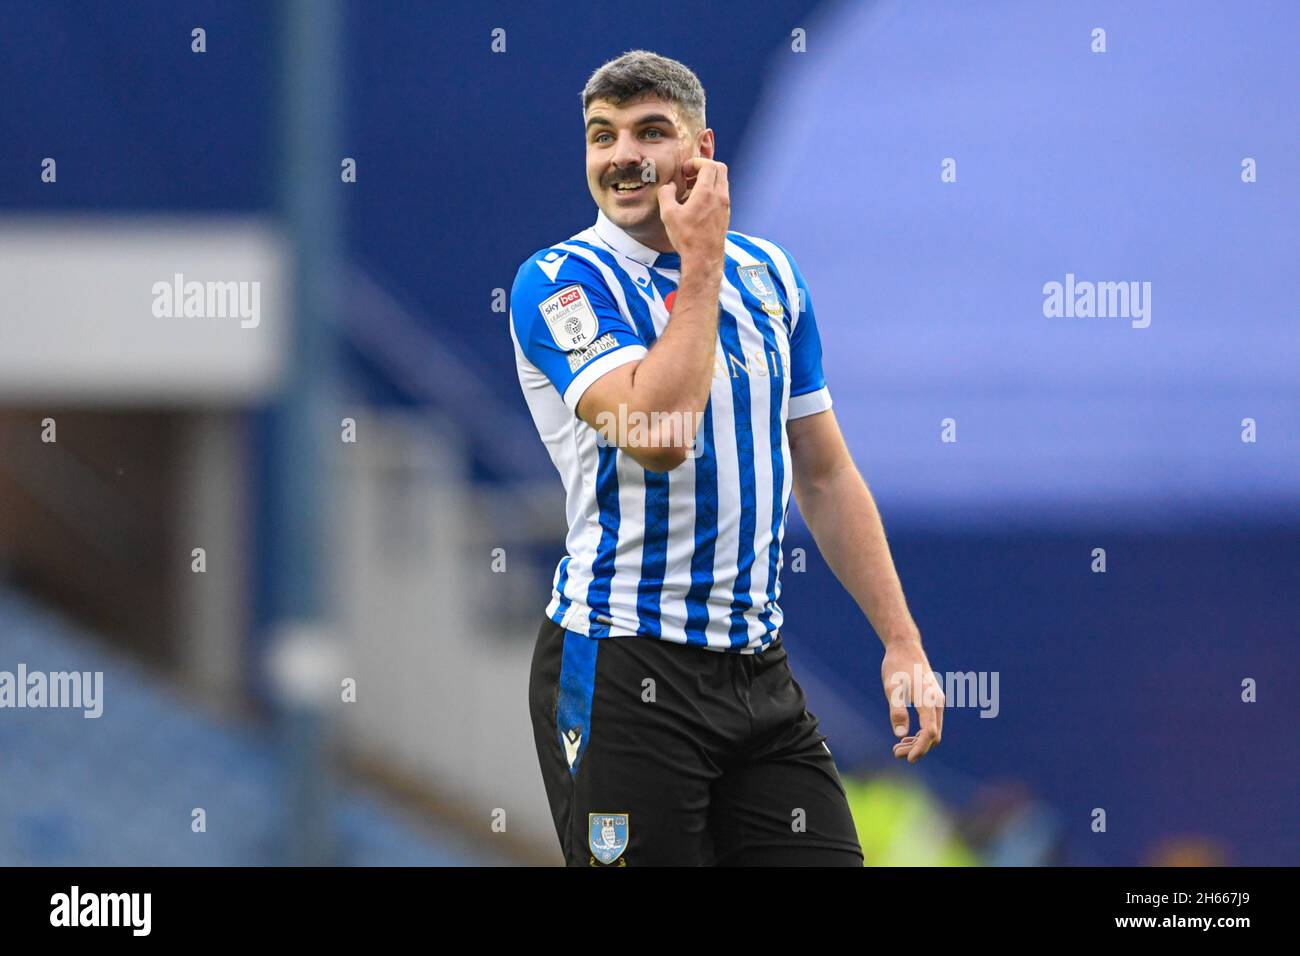 Sheffield Uk 13th Nov 21 Callum Paterson 13 Of Sheffield Wednesday In Action During The Game In Sheffield United Kingdom On 11 13 21 Photo By Simon Whitehead News Images Sipa Usa Credit Sipa Usa Alamy Live